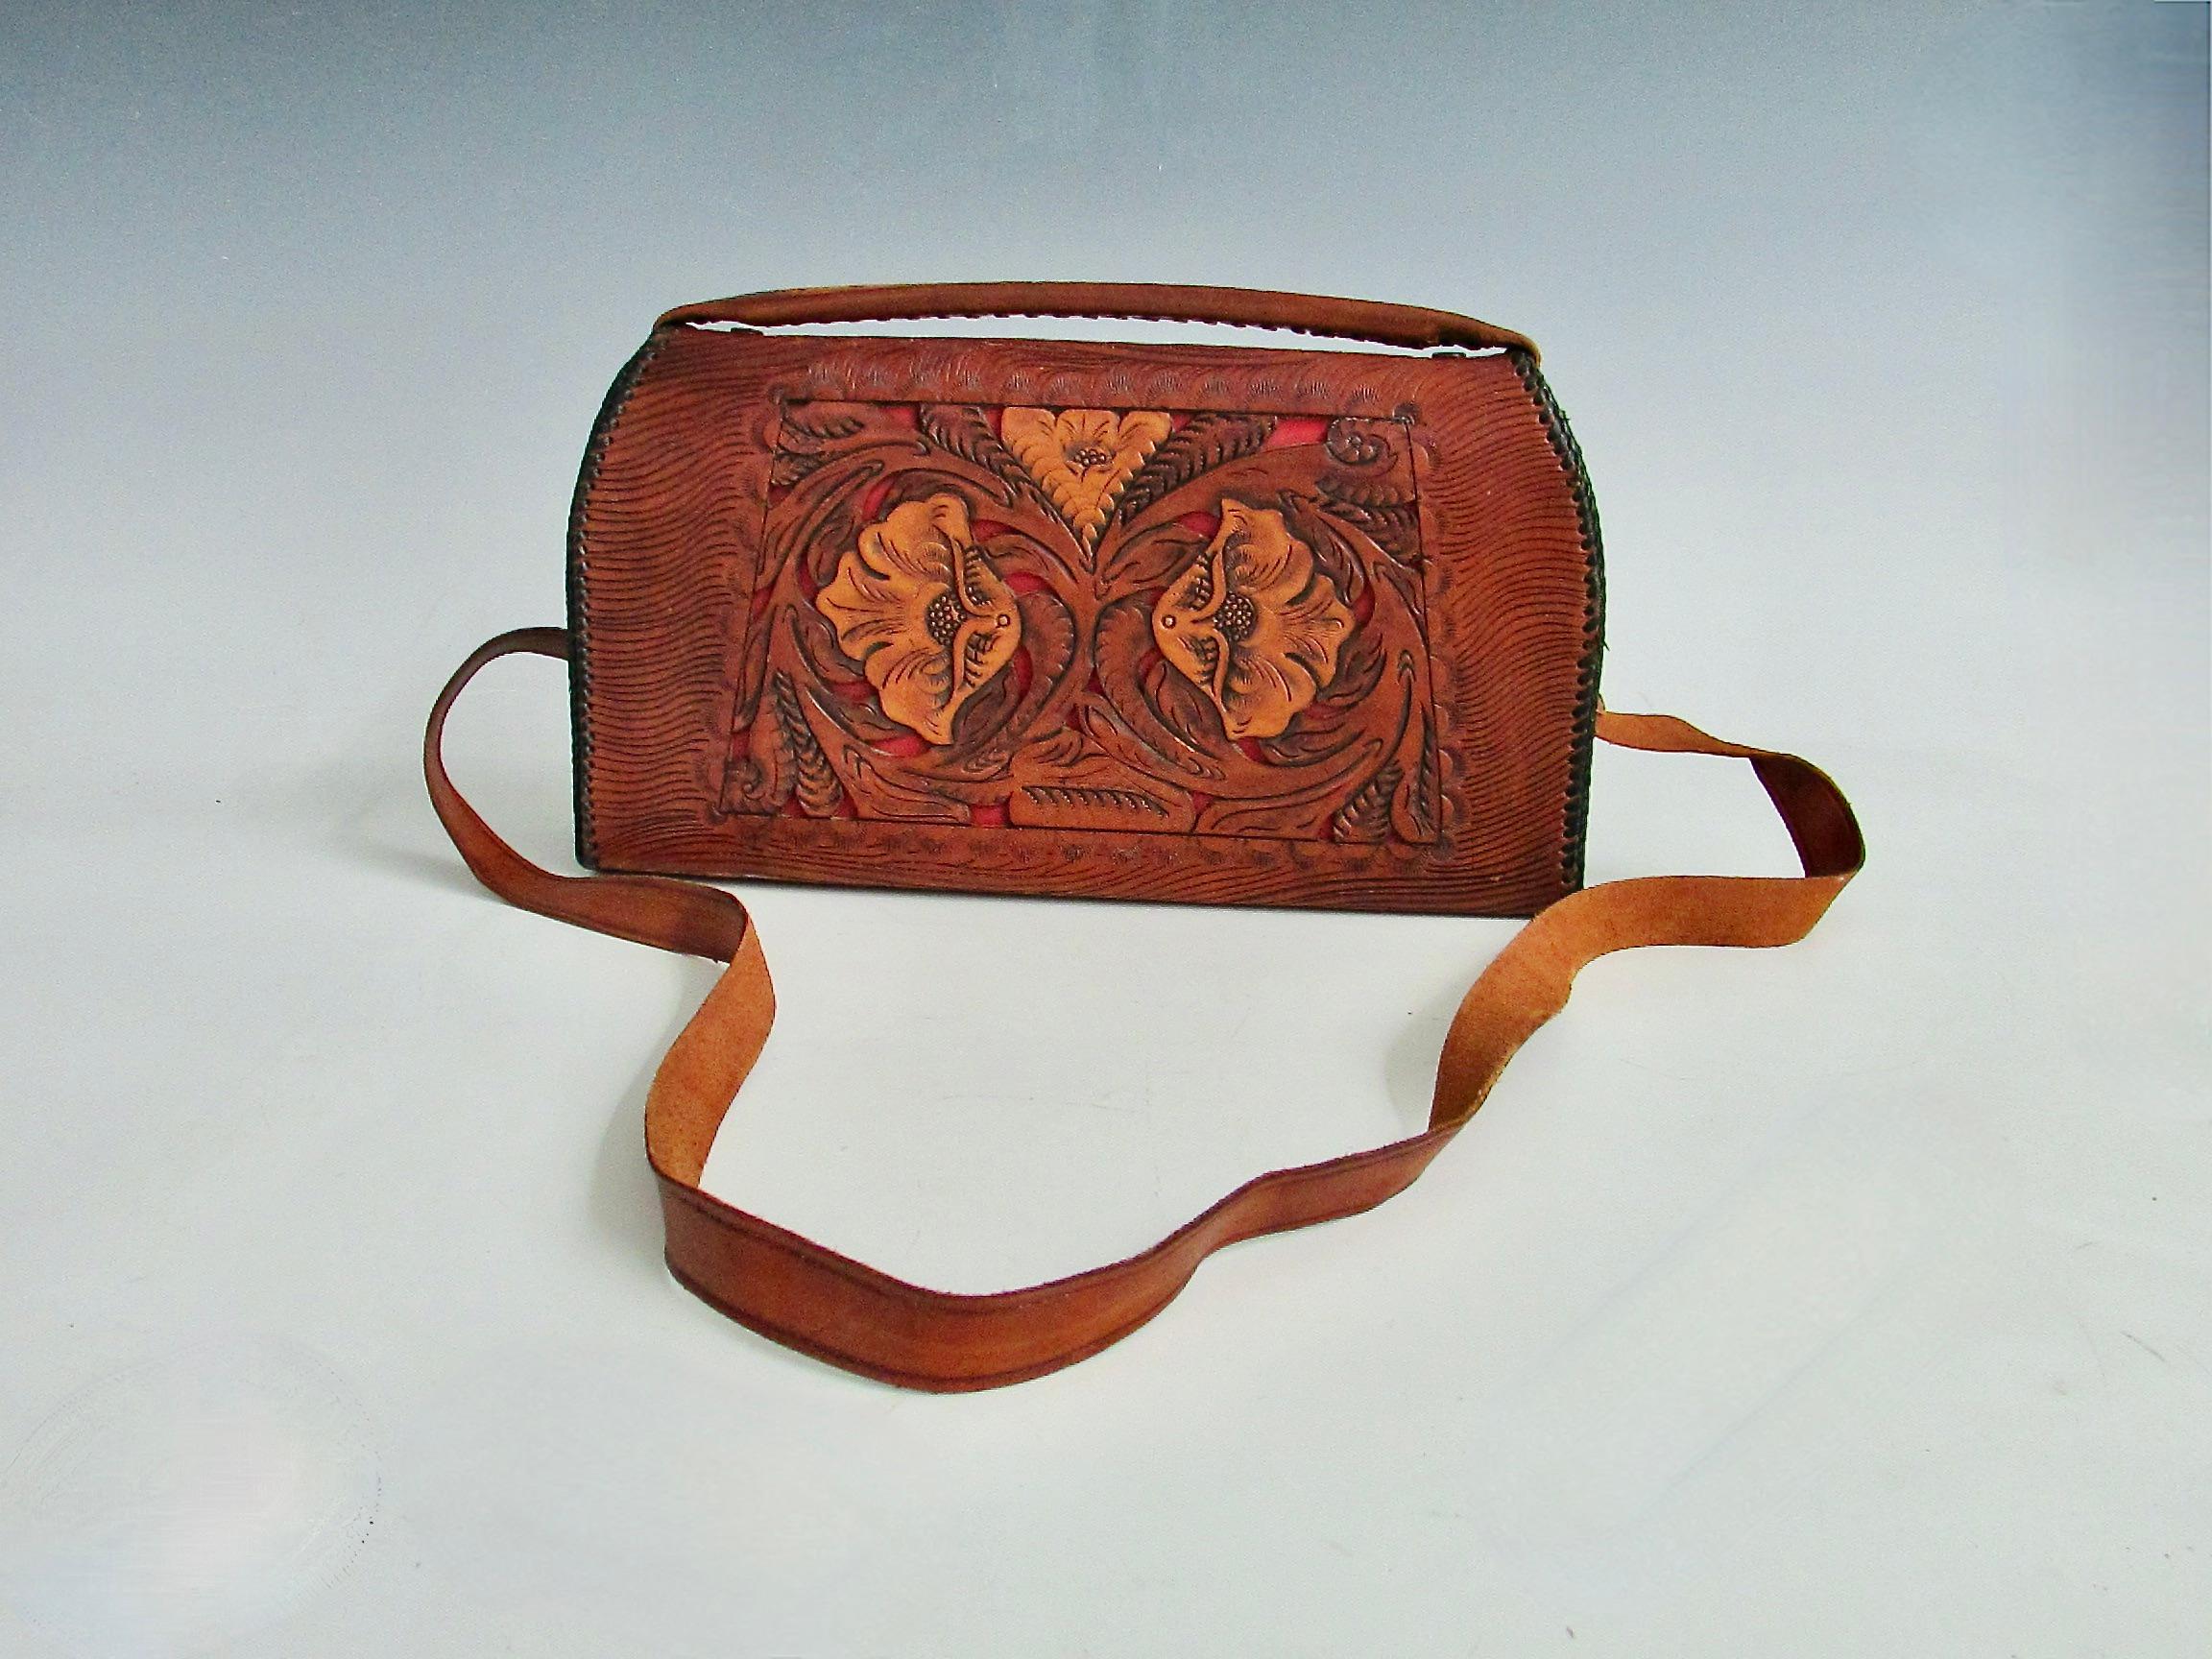 1950s fine Tooled Leather Western Theme Ladies Handbag Purse In Good Condition For Sale In Ferndale, MI